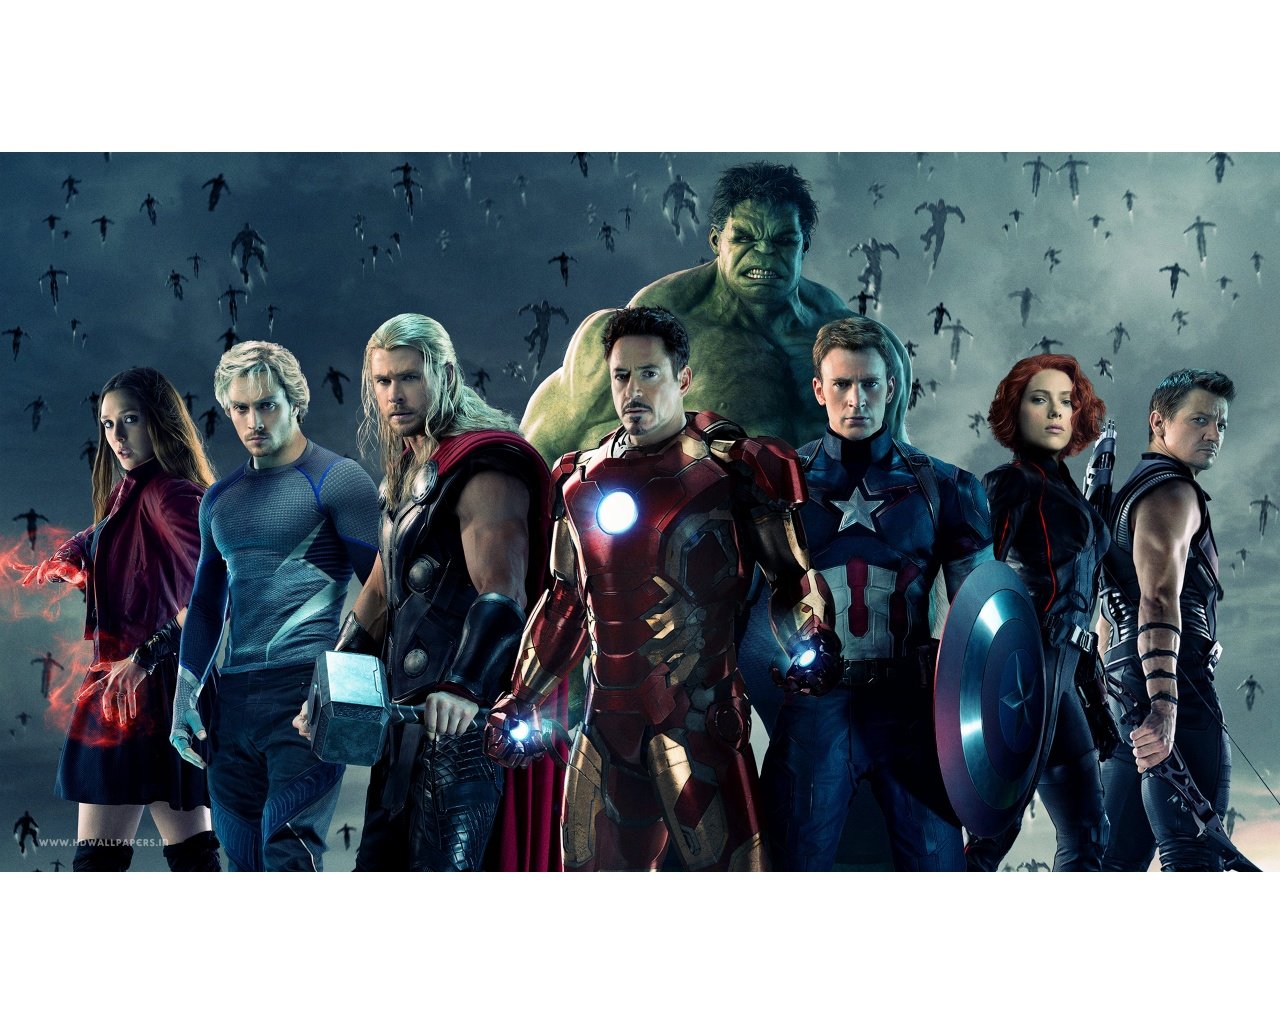 Avengers Age of Ultron Final Poster   1280x1024   433482